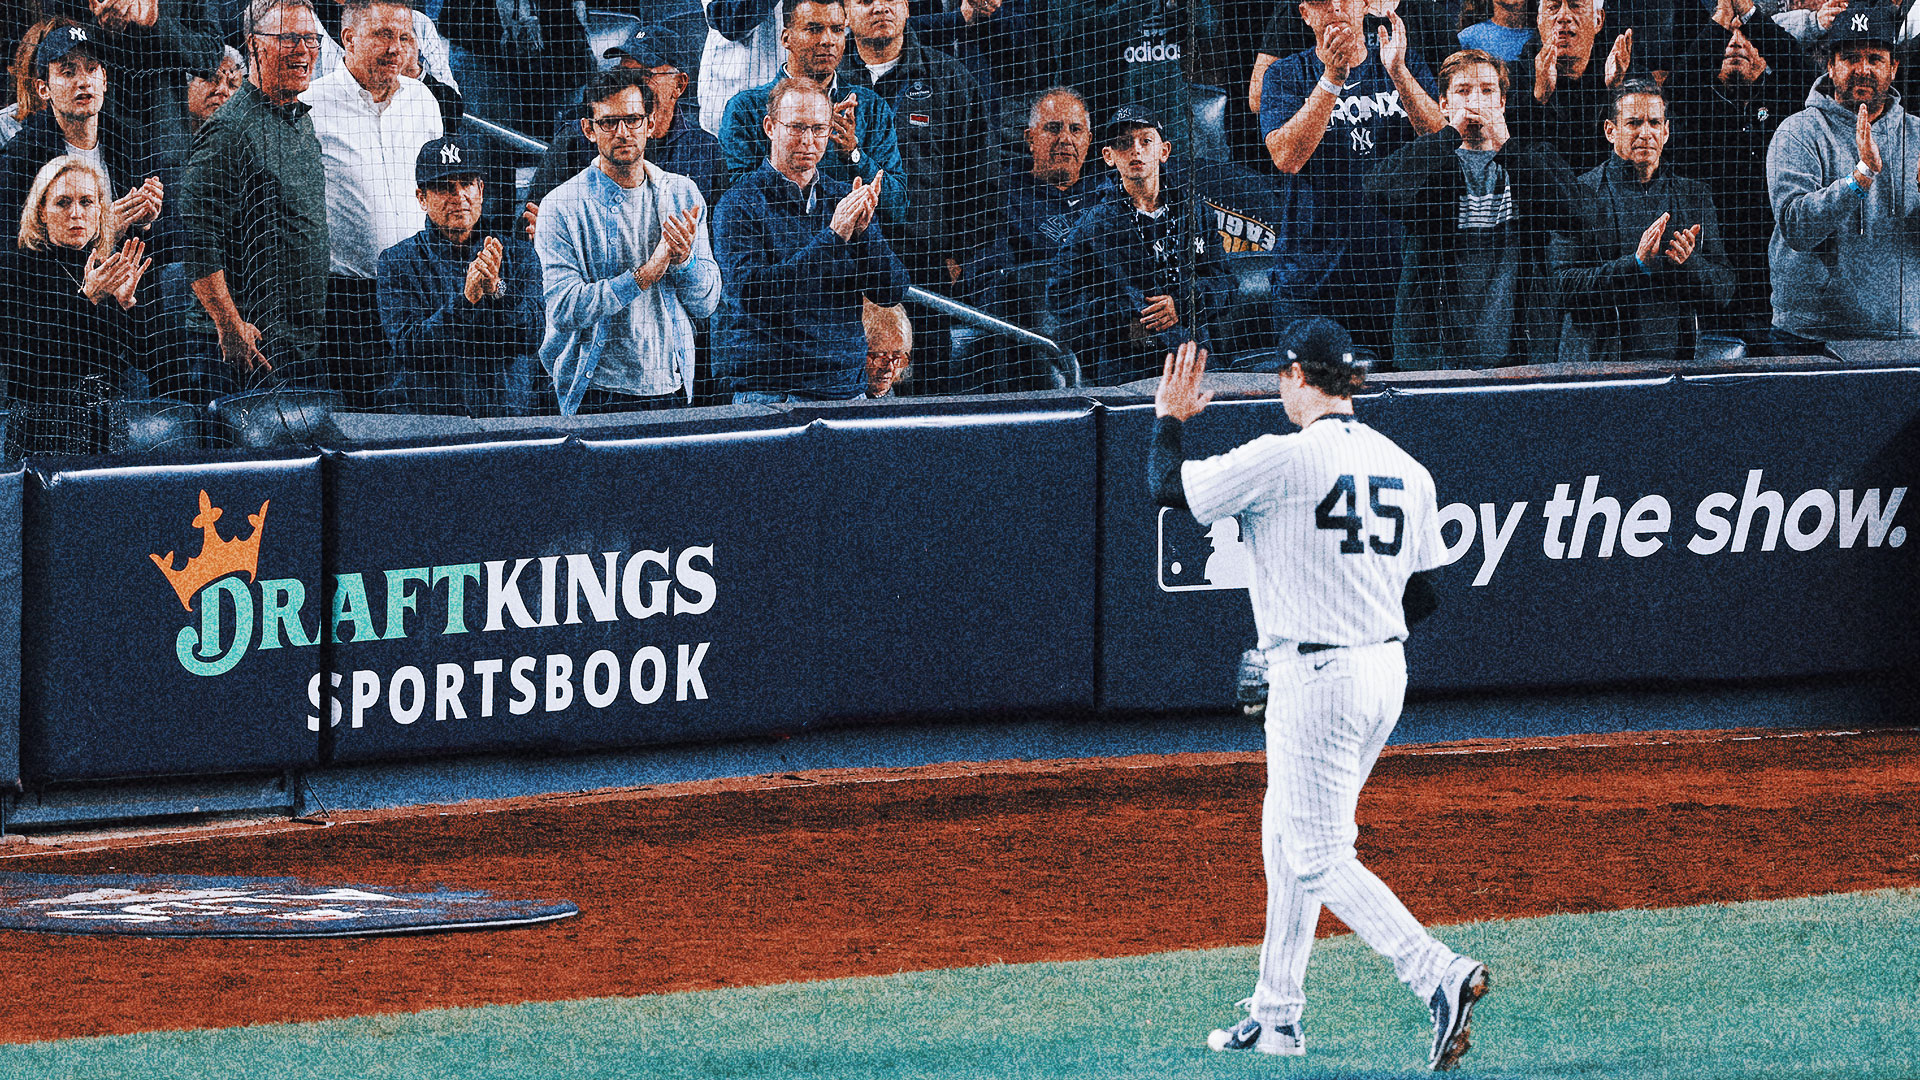 NY Yankees the talk of the town – and MLB – as 2018 season opens